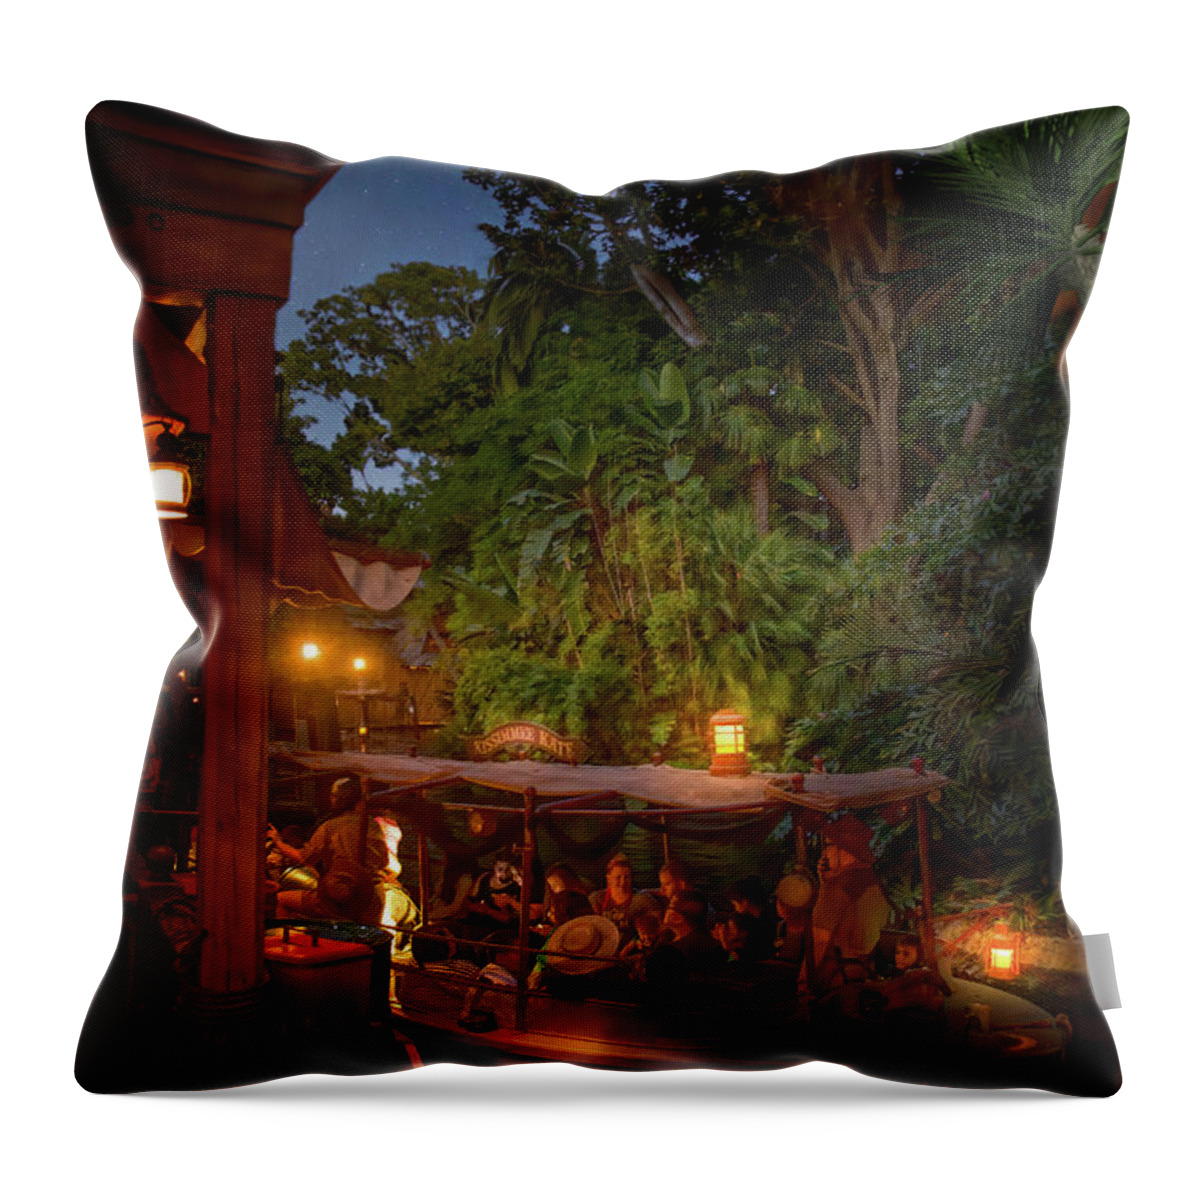 Magic Kingdom Throw Pillow featuring the photograph Disneyland Jungle Cruise by Mark Andrew Thomas